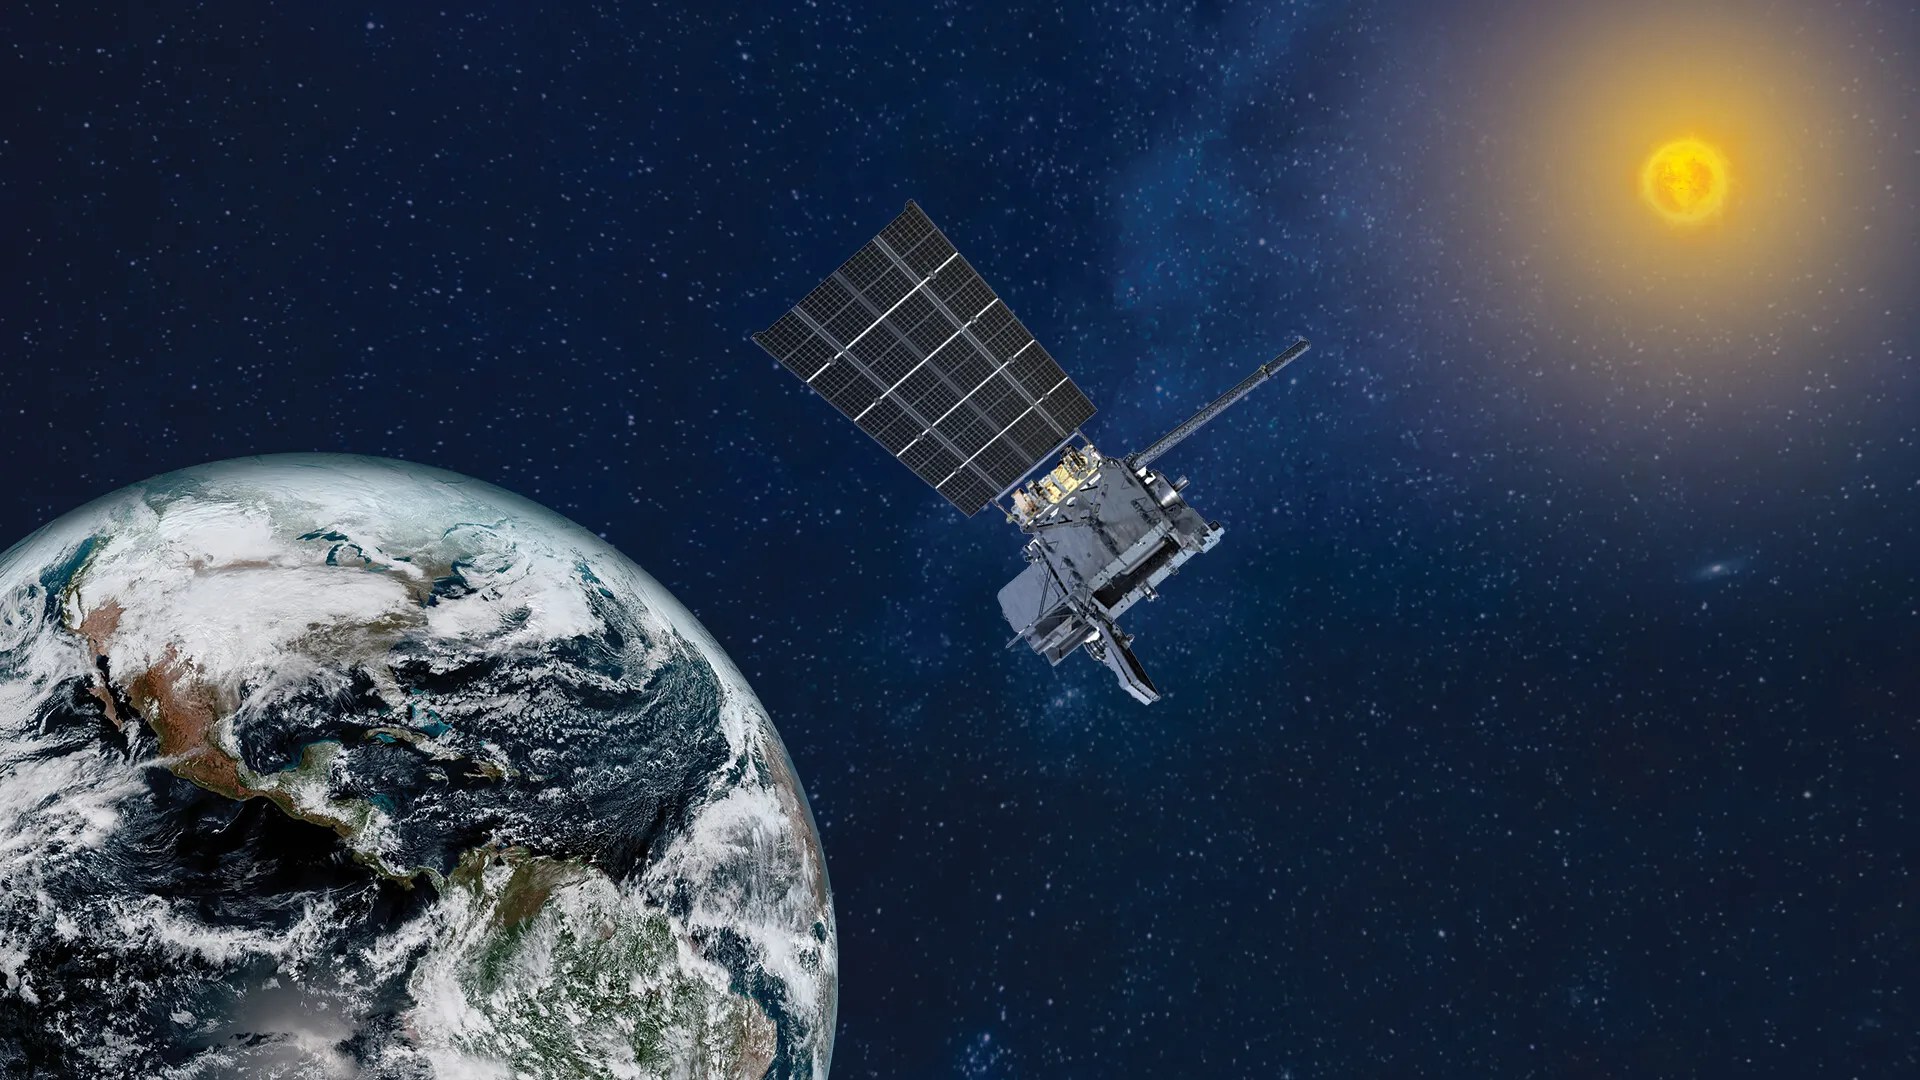 goes-u spacecraft 3d rendering in center of image visualized from the point of view of earth orbit with the earth to the left and the sun to the right.